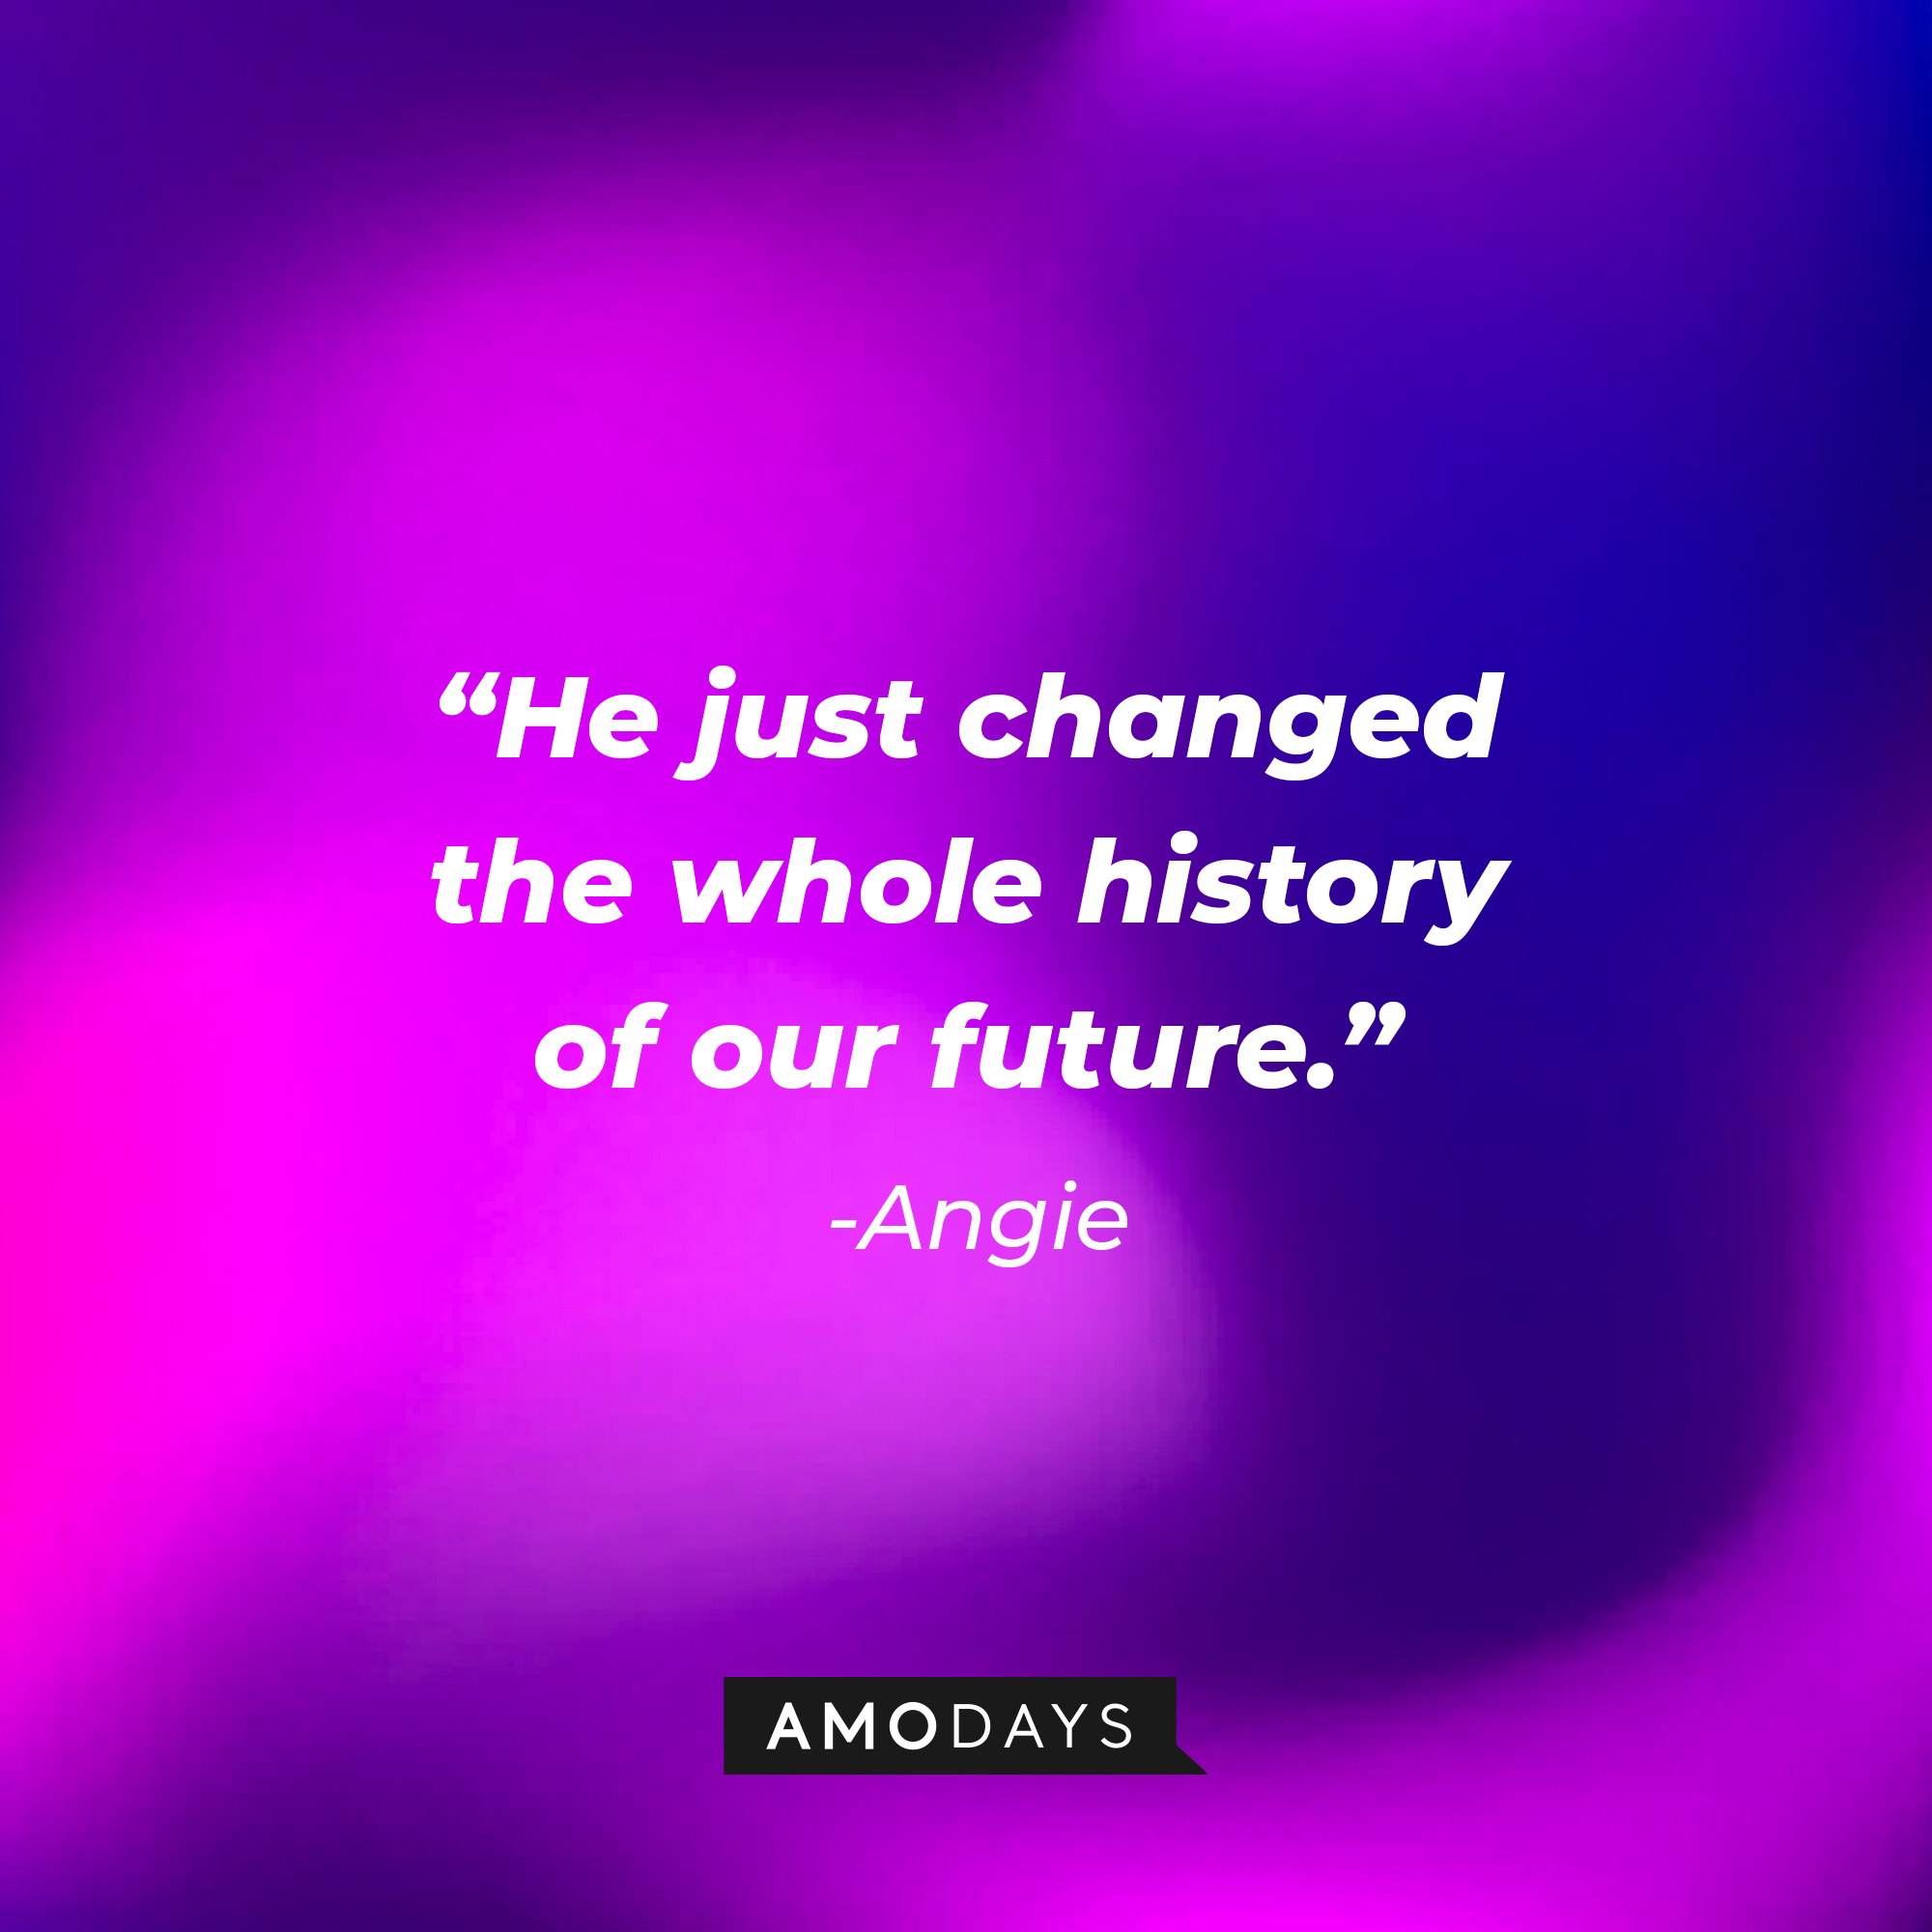 Angie's quote: "He just changed the whole history of our future." | Source: Amodays